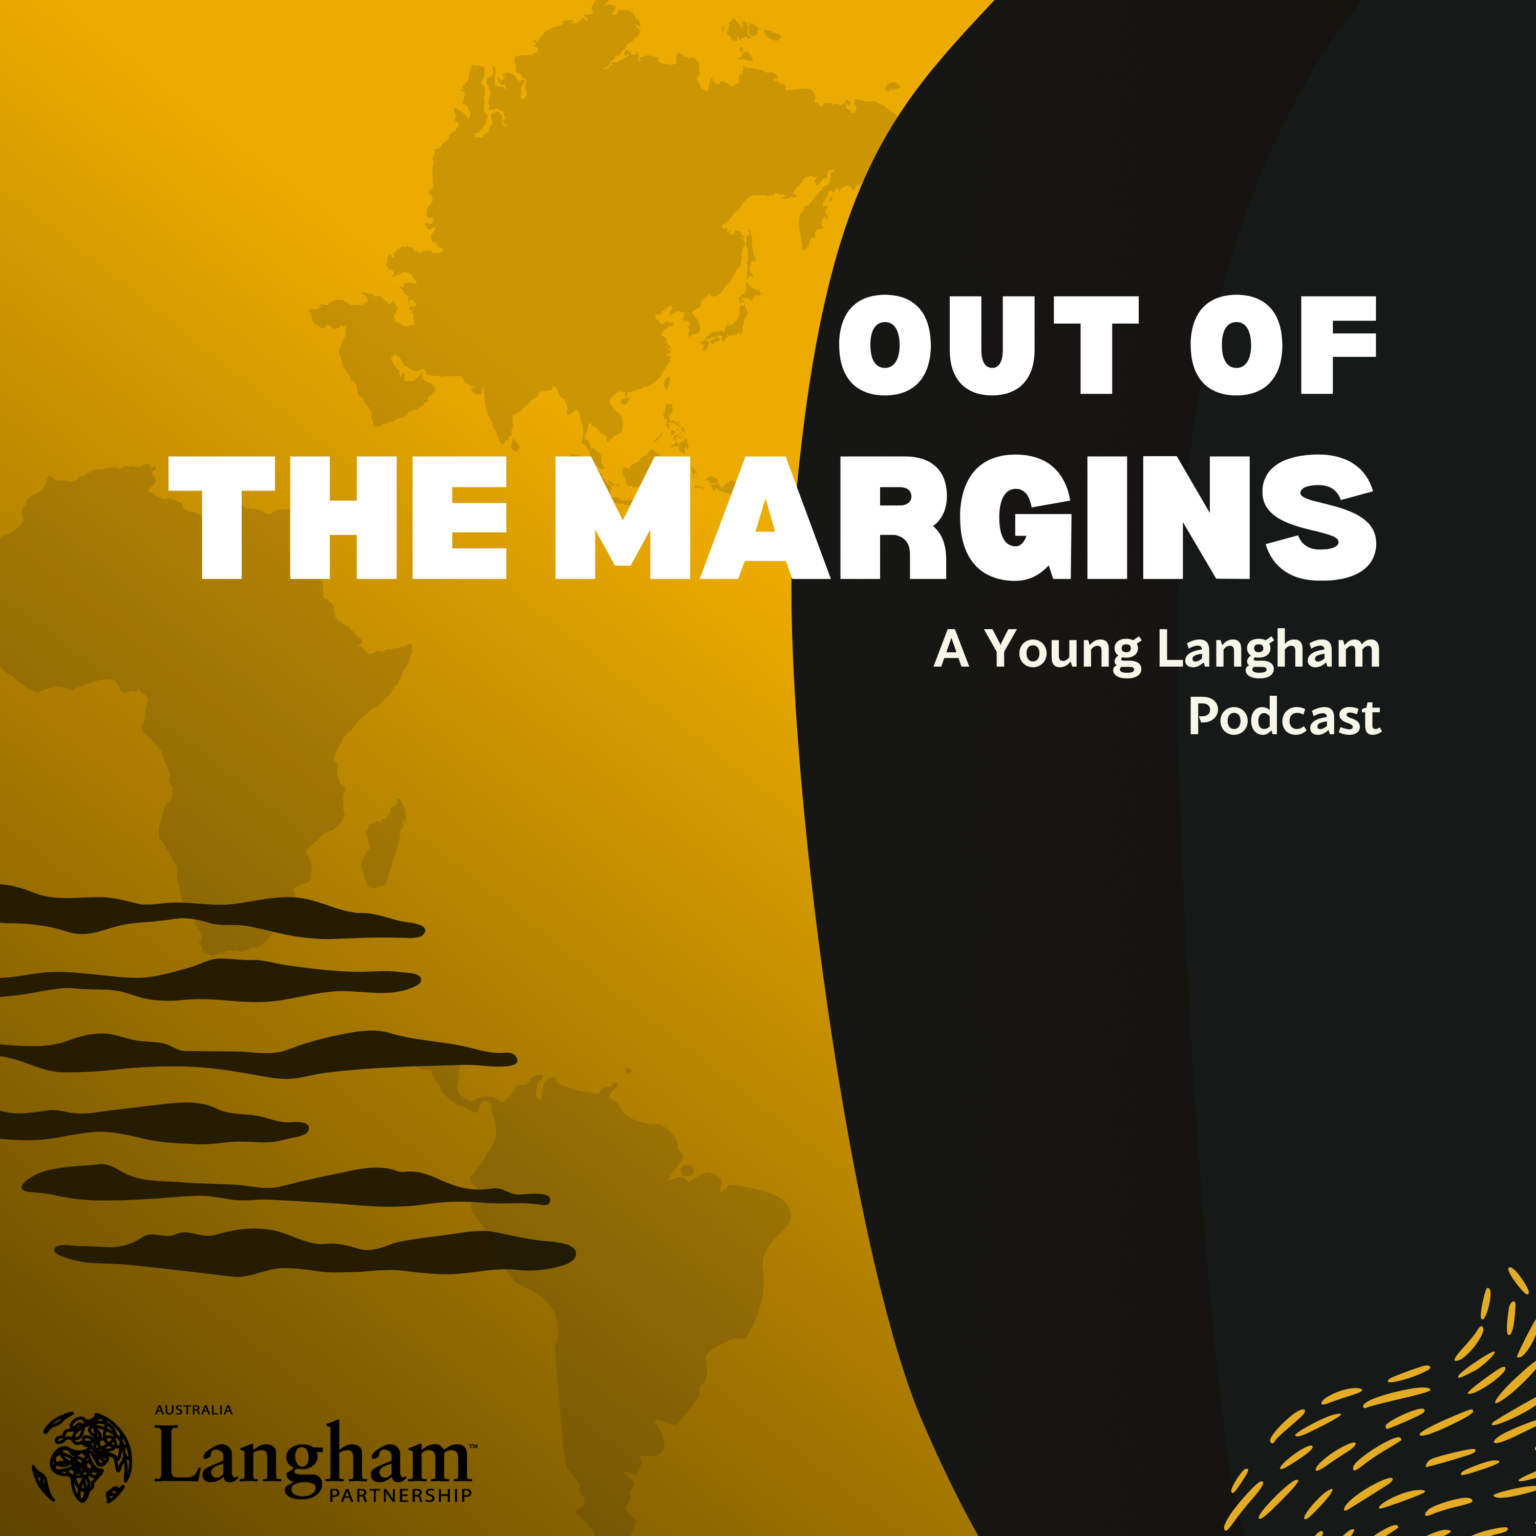 Out of the Margins podcast logo